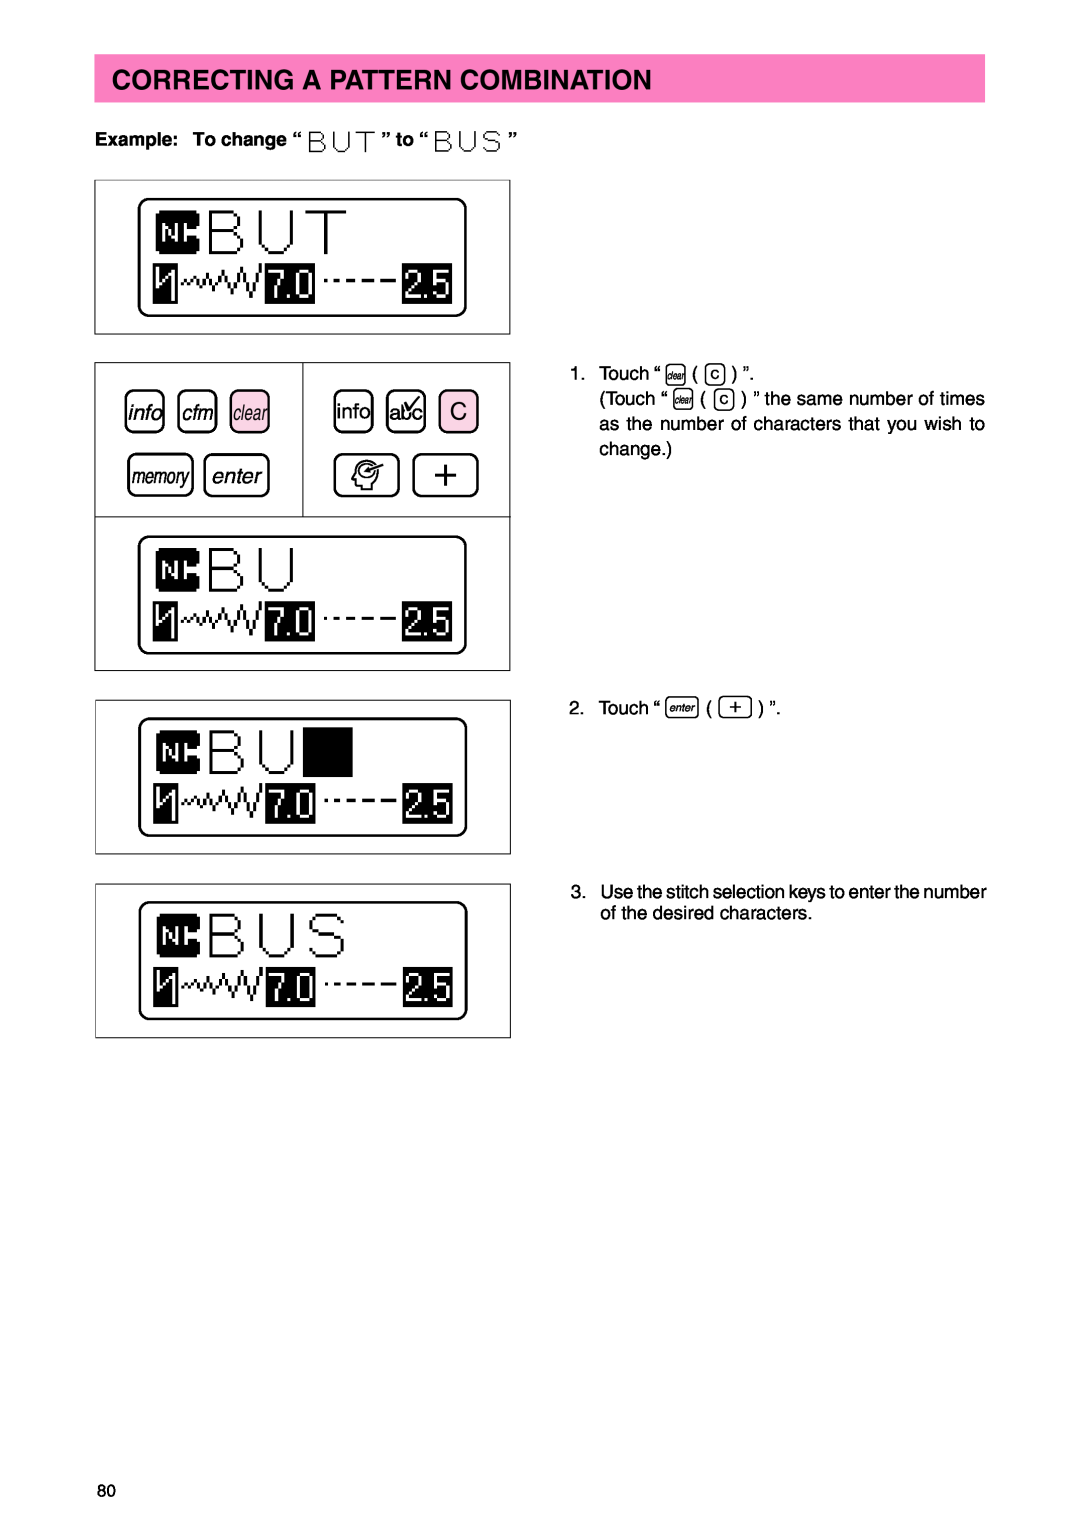 Brother PC 3000 operation manual Correcting A Pattern Combination, Example To change “ ” to “ ”, info, memory, enter, clear 